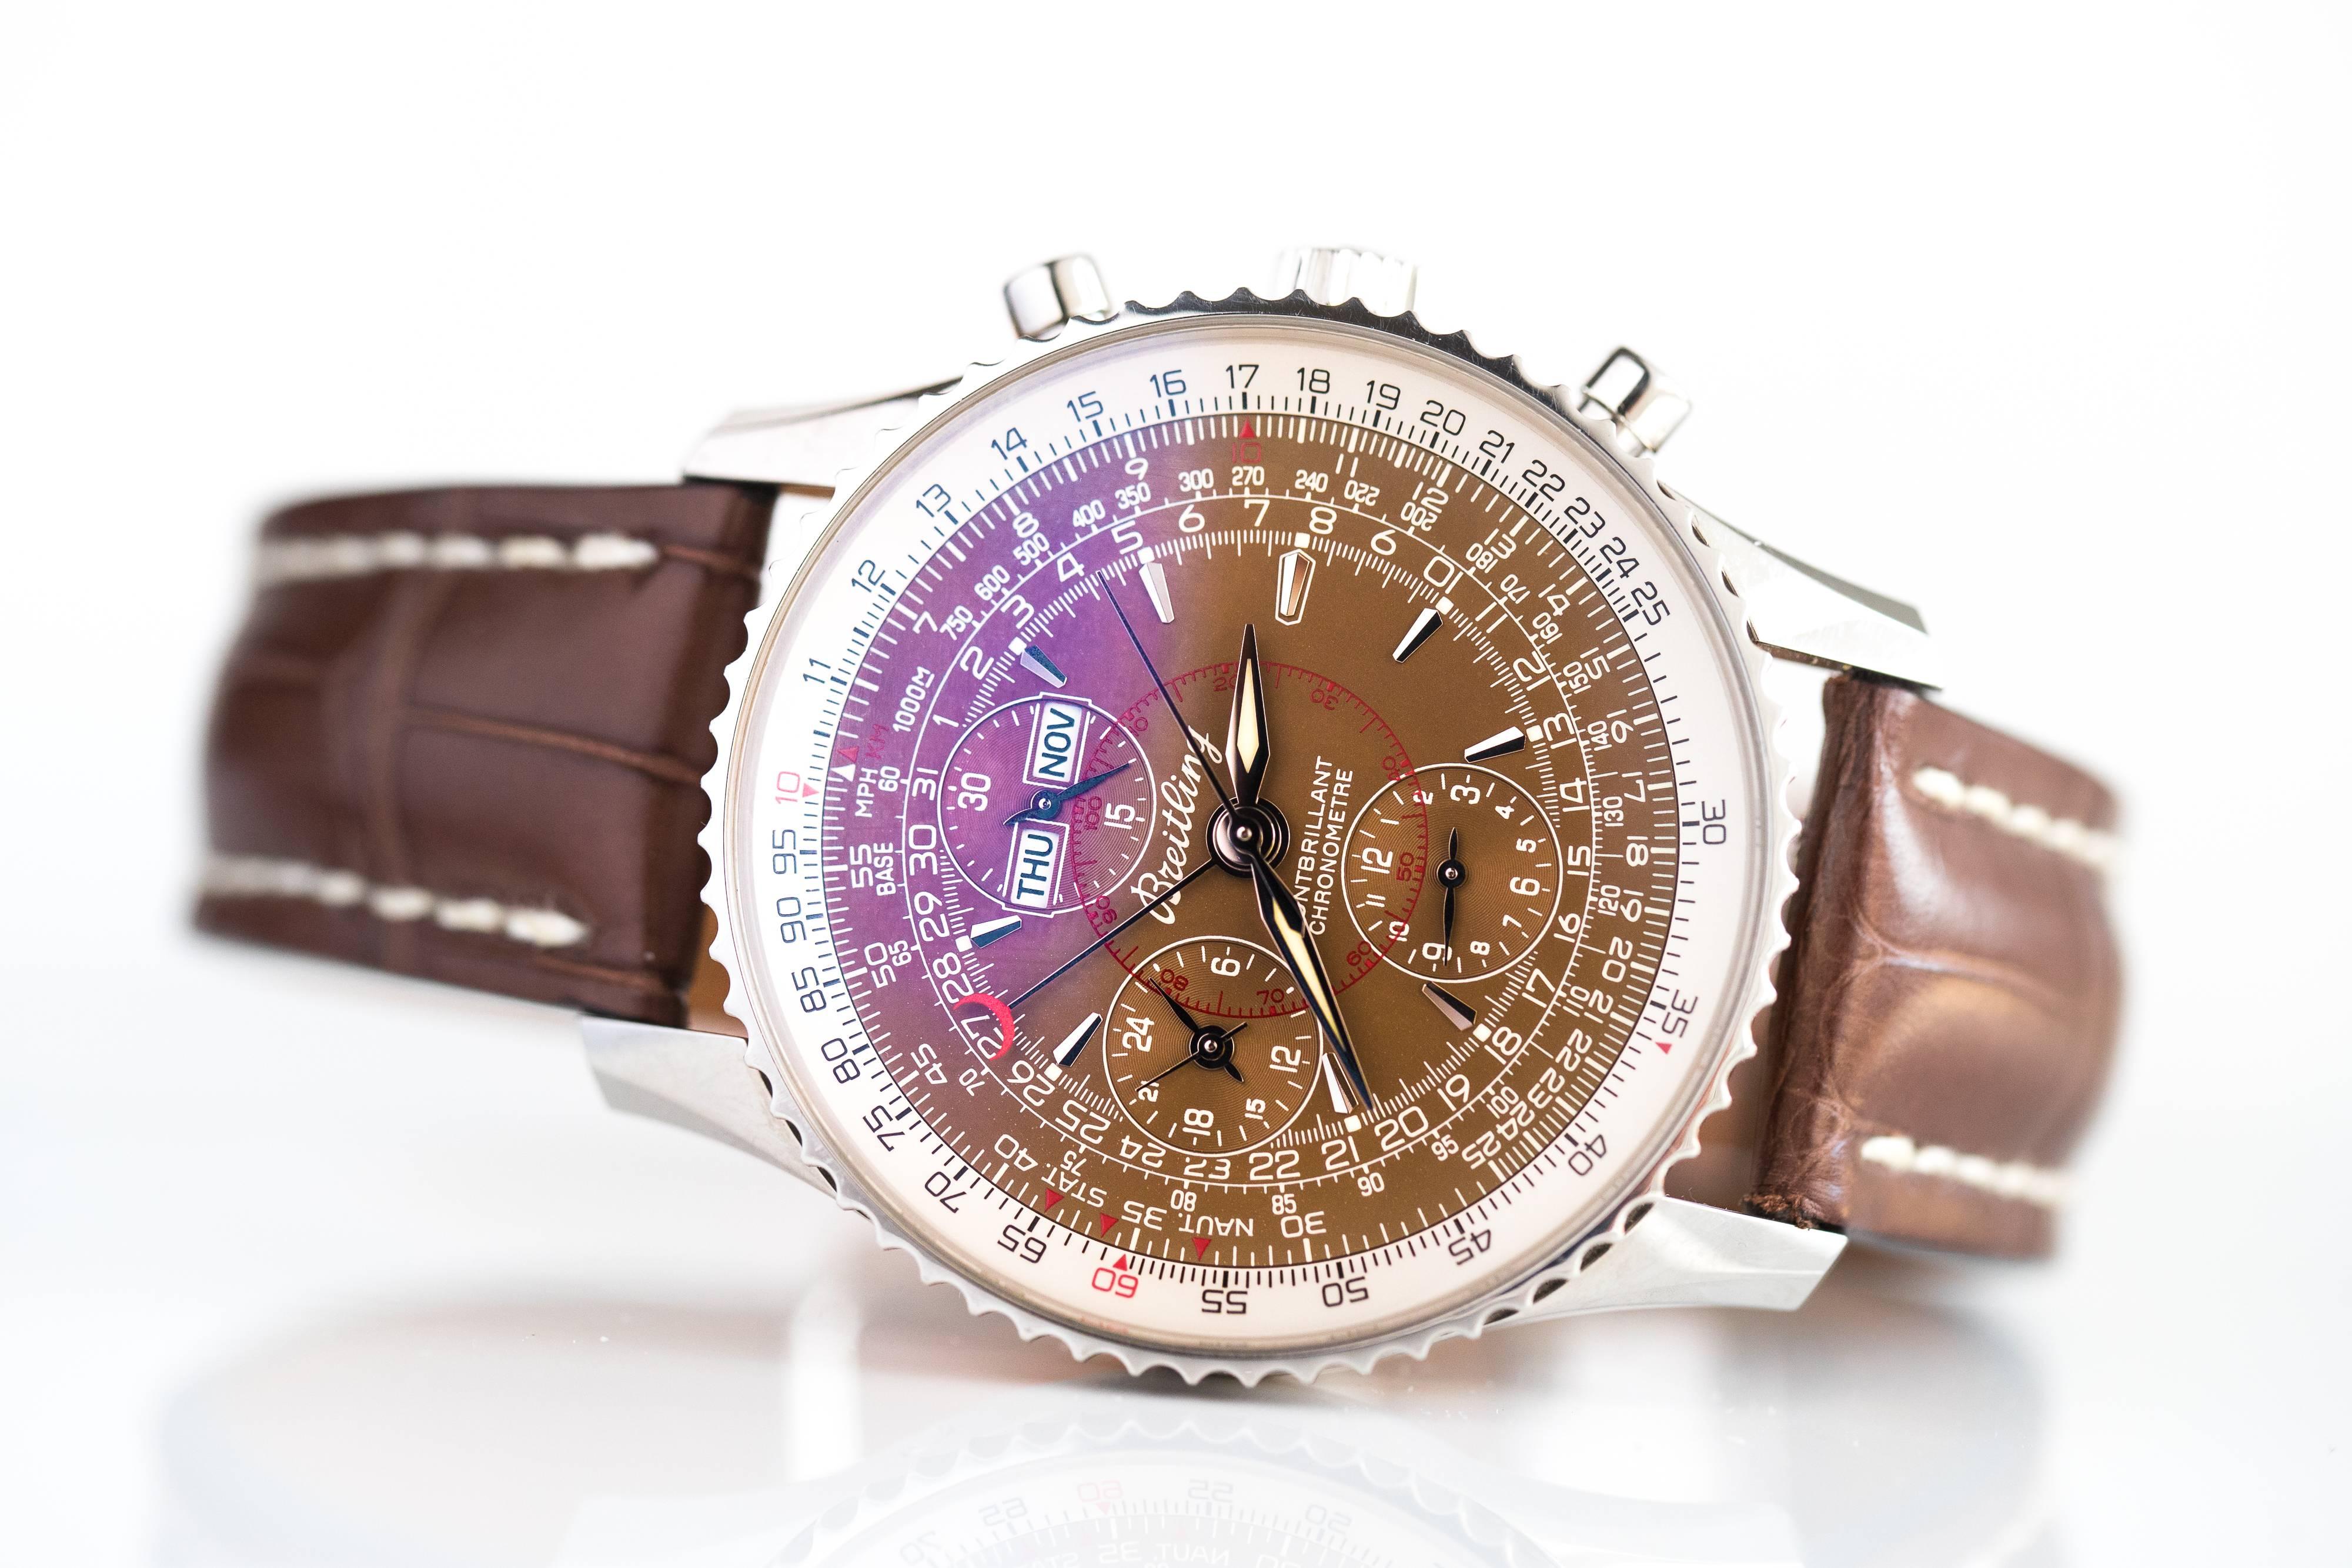 2011 Breitling Montbrillant Navitimer Datora Watch. Features a 43 millimeter case, Bronze Stick Dial with Luminous Hands and Dial Markers, Brown Crocodile Band with Deployment clasp, Bidirectional rotating Aviation Slide Rule bezel, Chronograph,